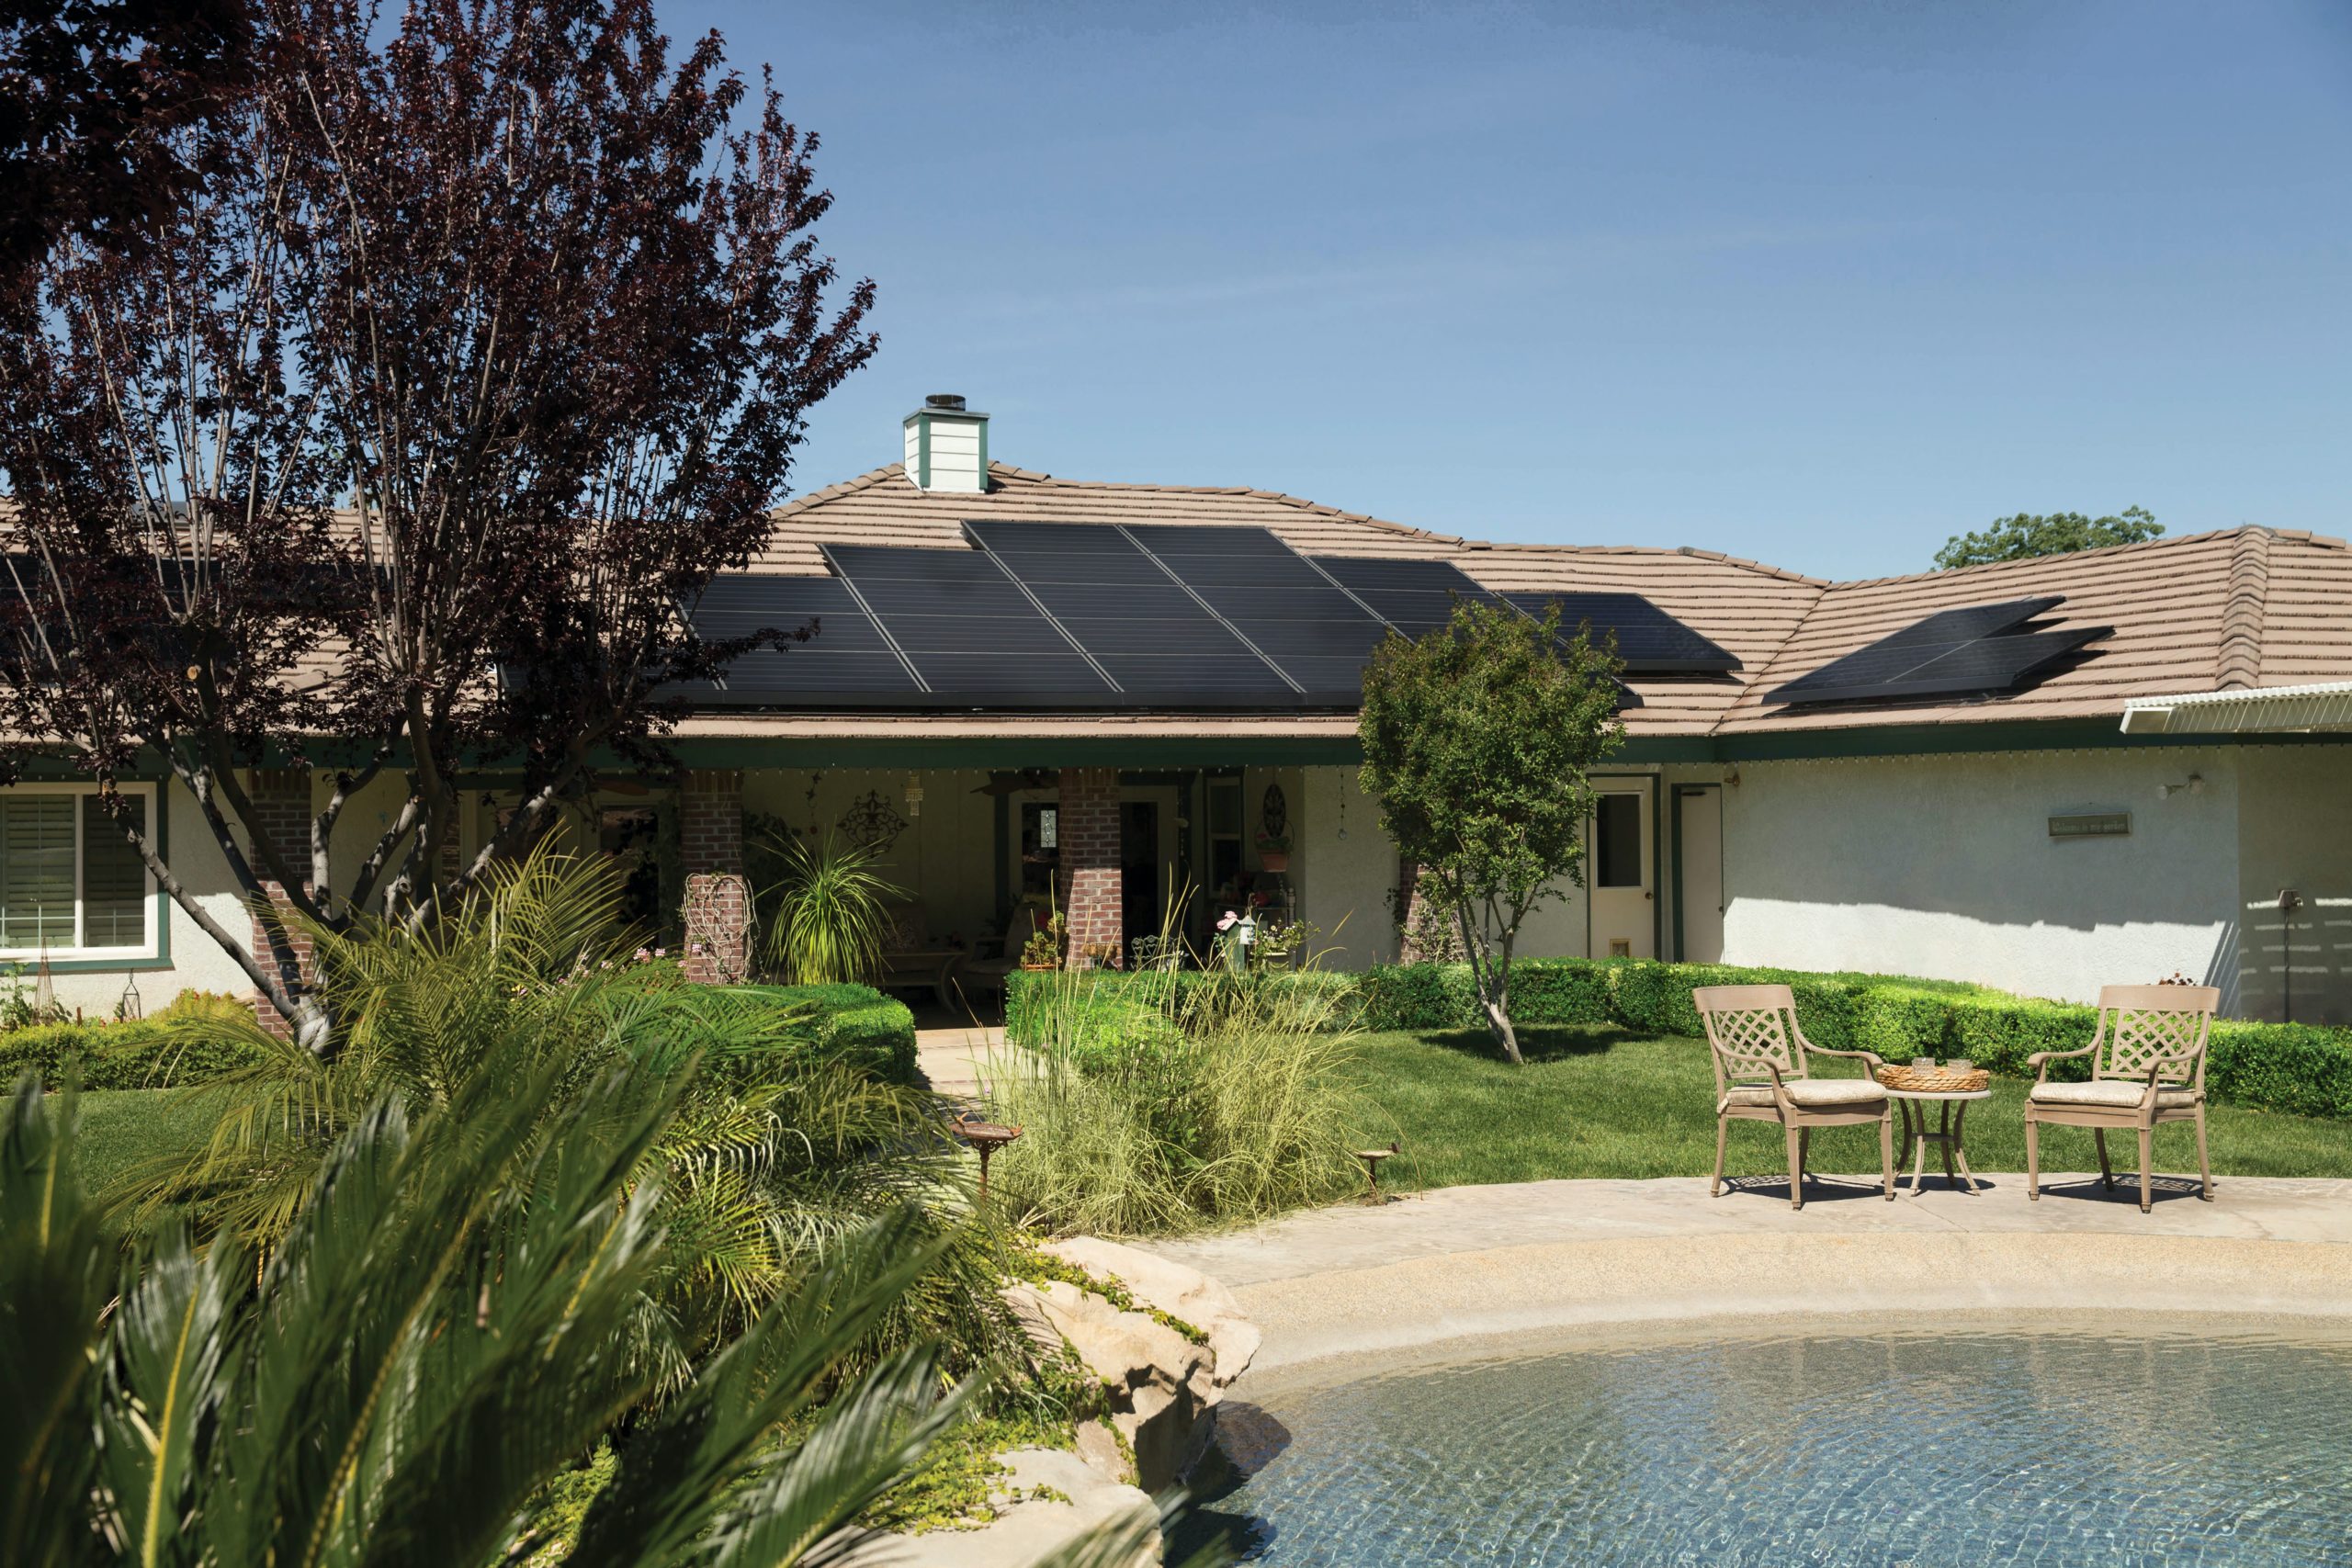 A residential home with solar panels installed on the roof, demonstrating the integration of solar energy solutions for sustainable and efficient home power generation.